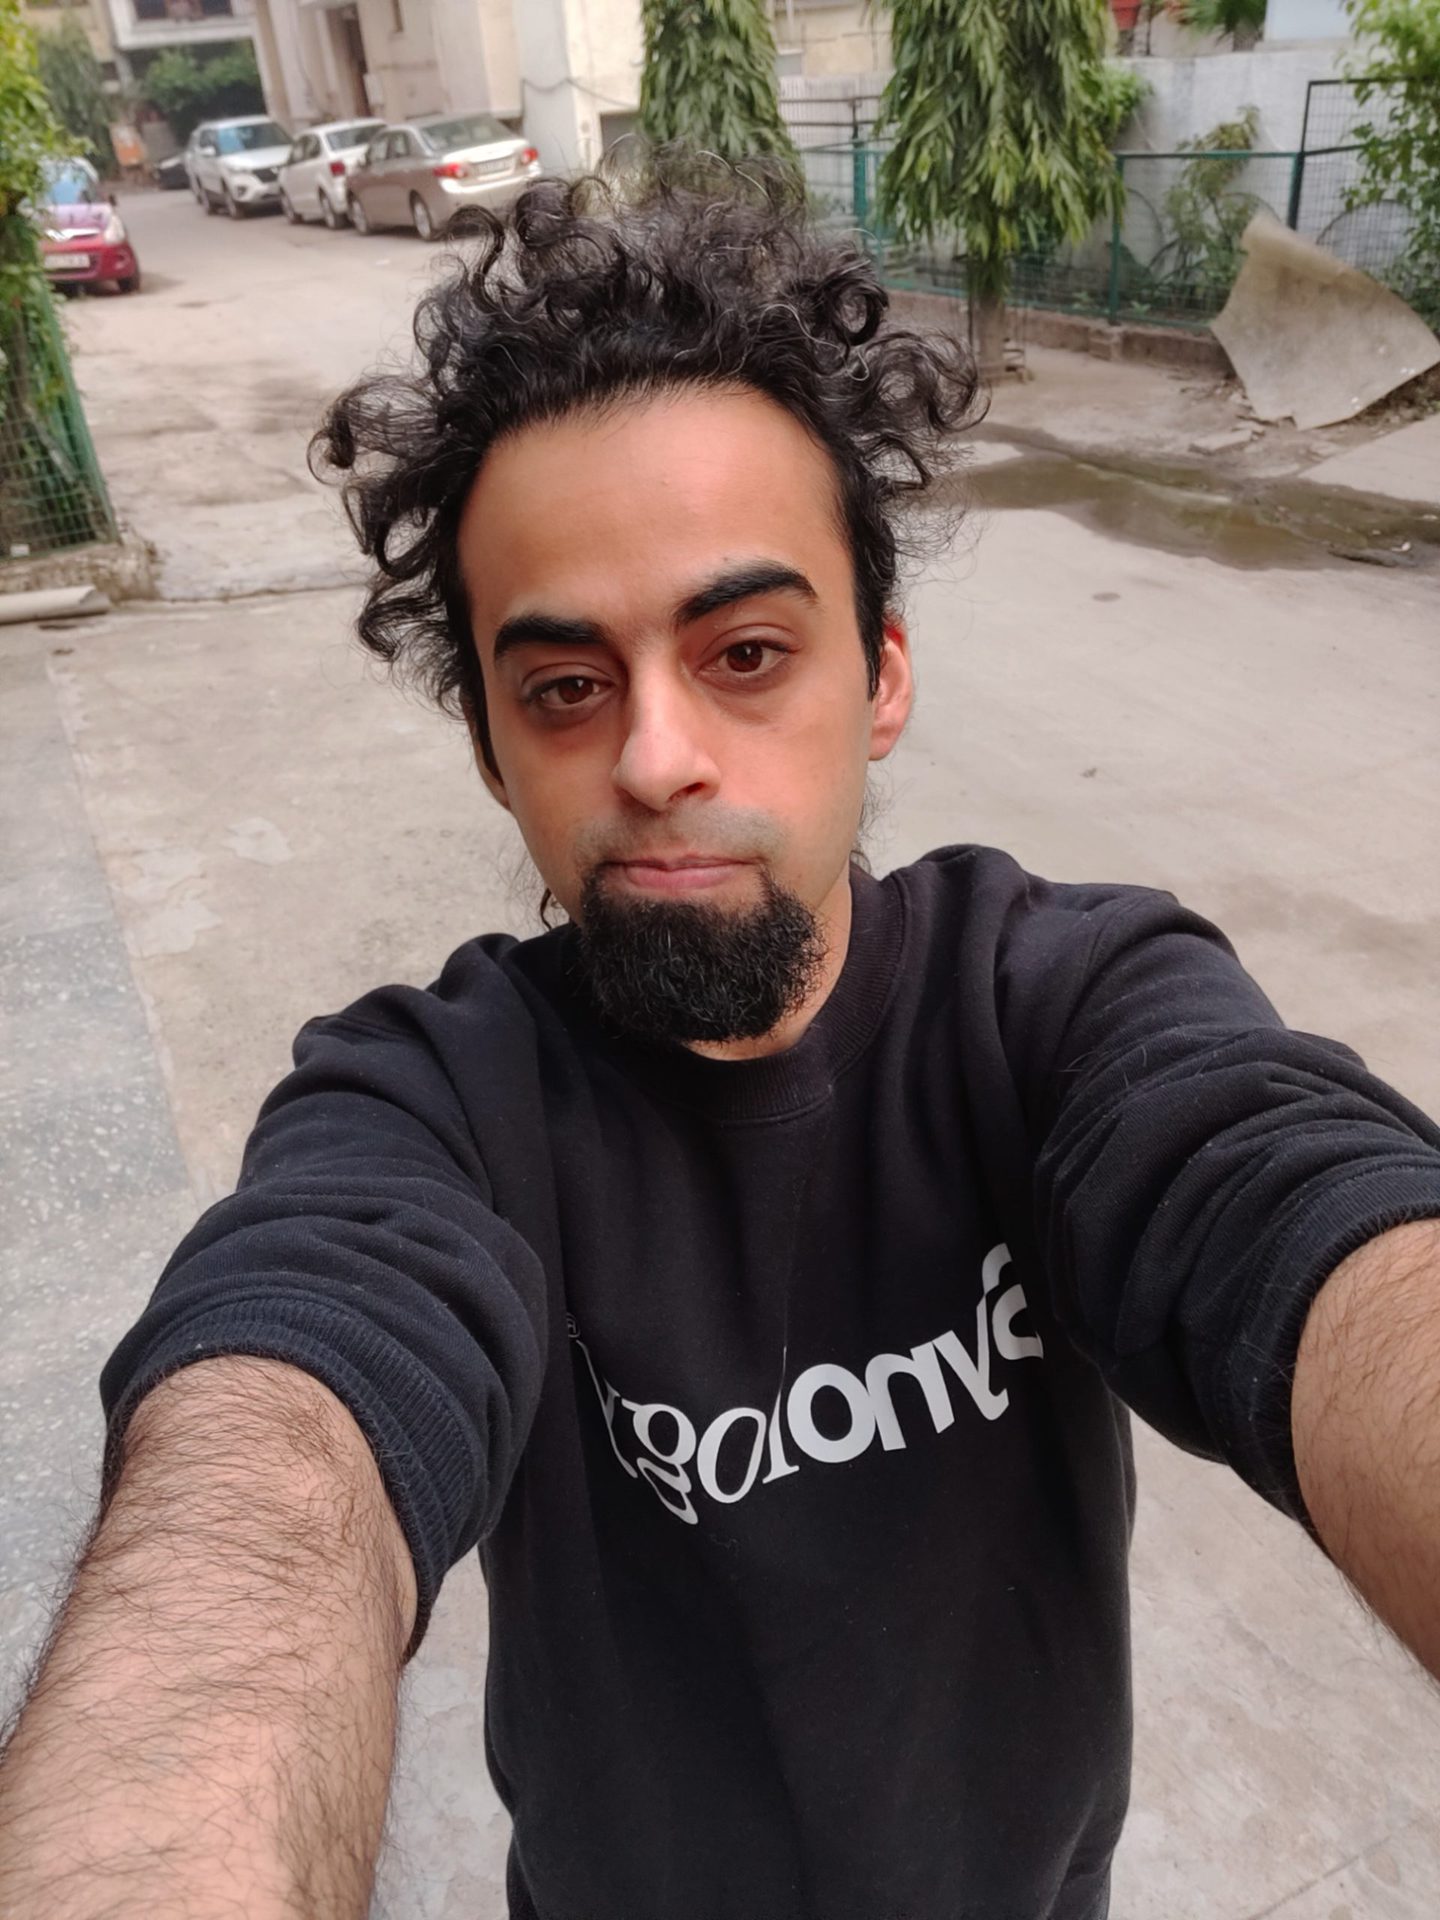 OnePlus 9RT selfie camera normal outfoor selfie of a man with dark curly hair and a beard, wearing a black top